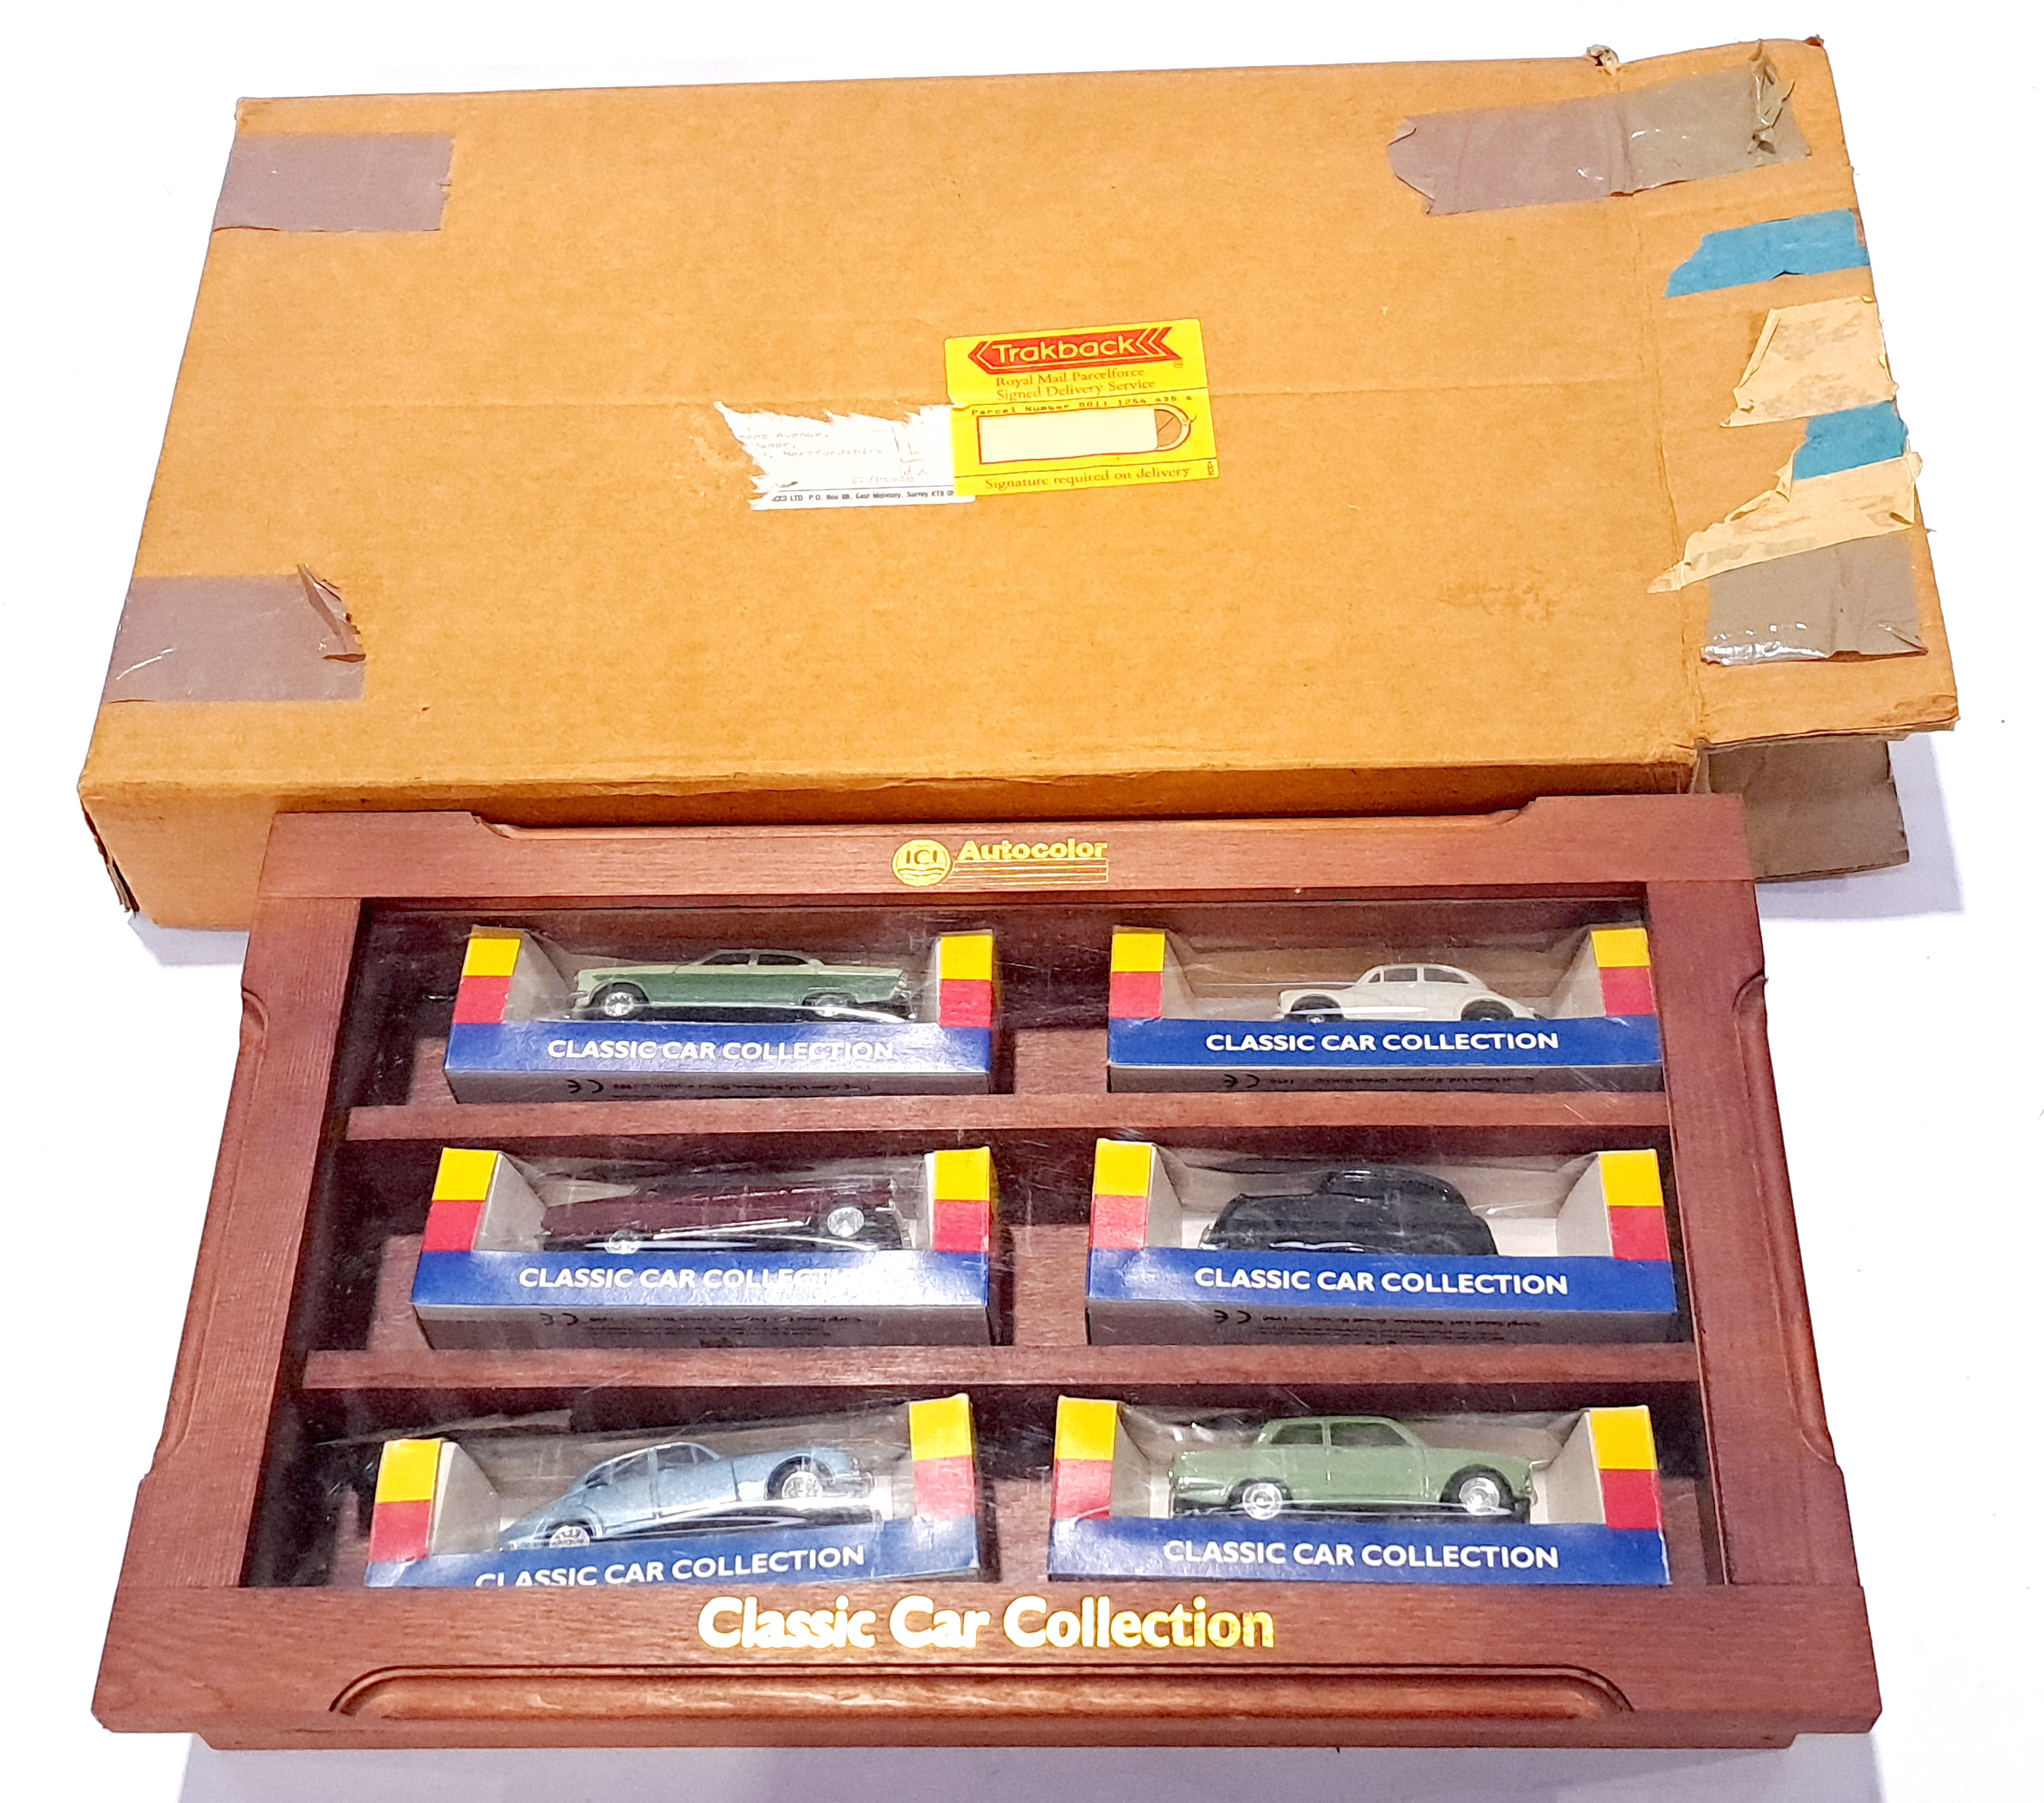 Corgi ICI a mixed boxed group of Vehicles with cabinet and mailer box. Conditions generally appea...